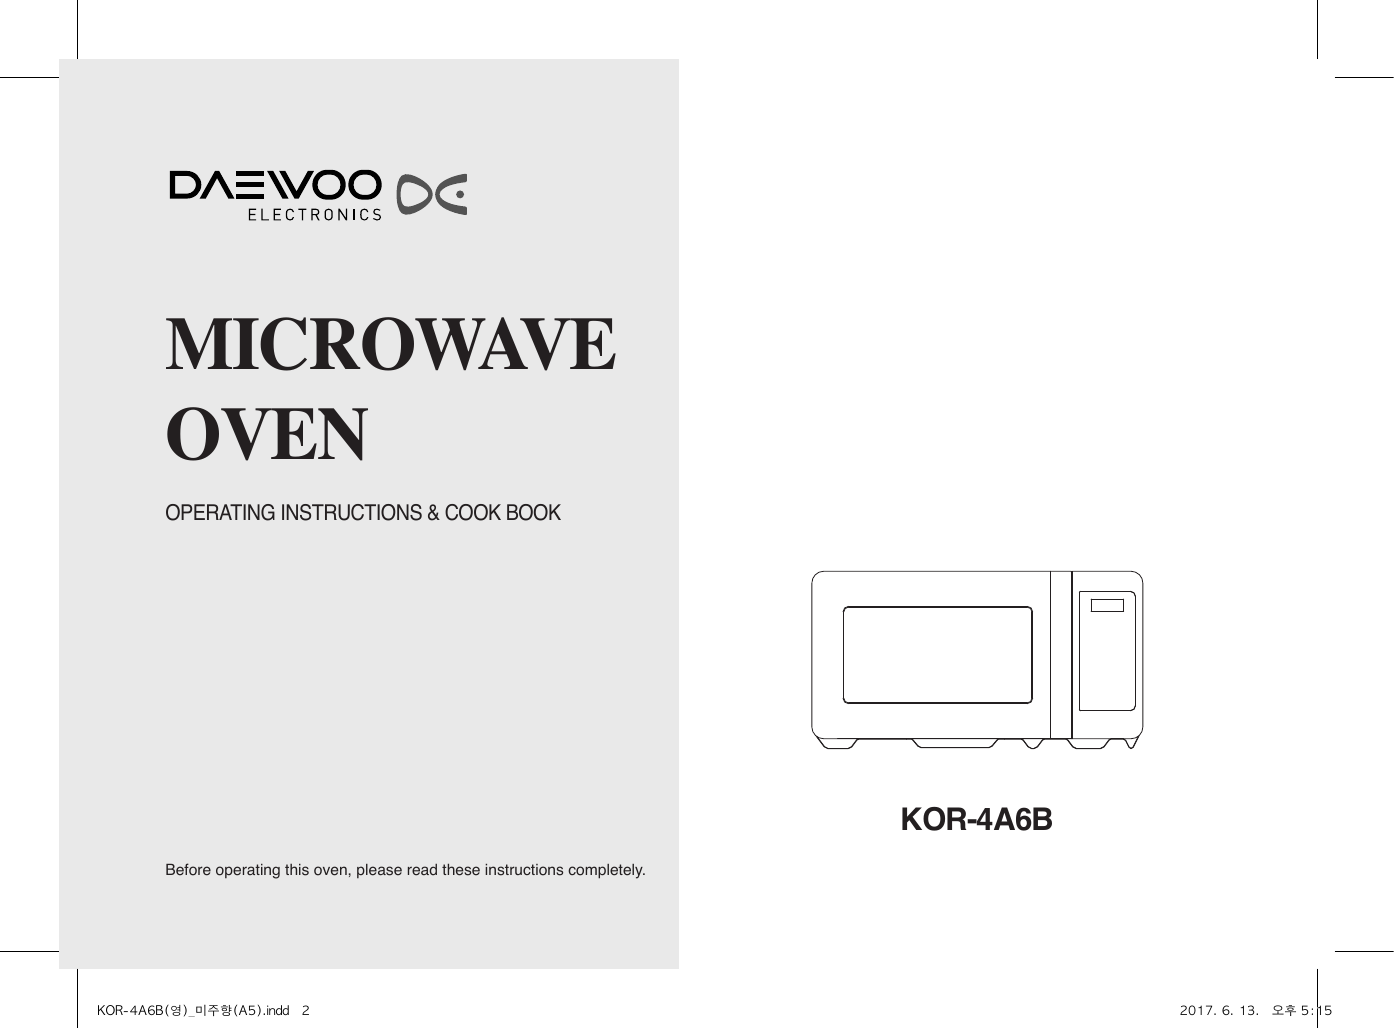 Before operating this oven, please read these instructions completely.OPERATING INSTRUCTIONS &amp; COOK BOOKMICROWAVEOVENKOR-4A6BKOR-4A6B(영)_미주향(A5).indd   2 2017. 6. 13.   오후 5:15